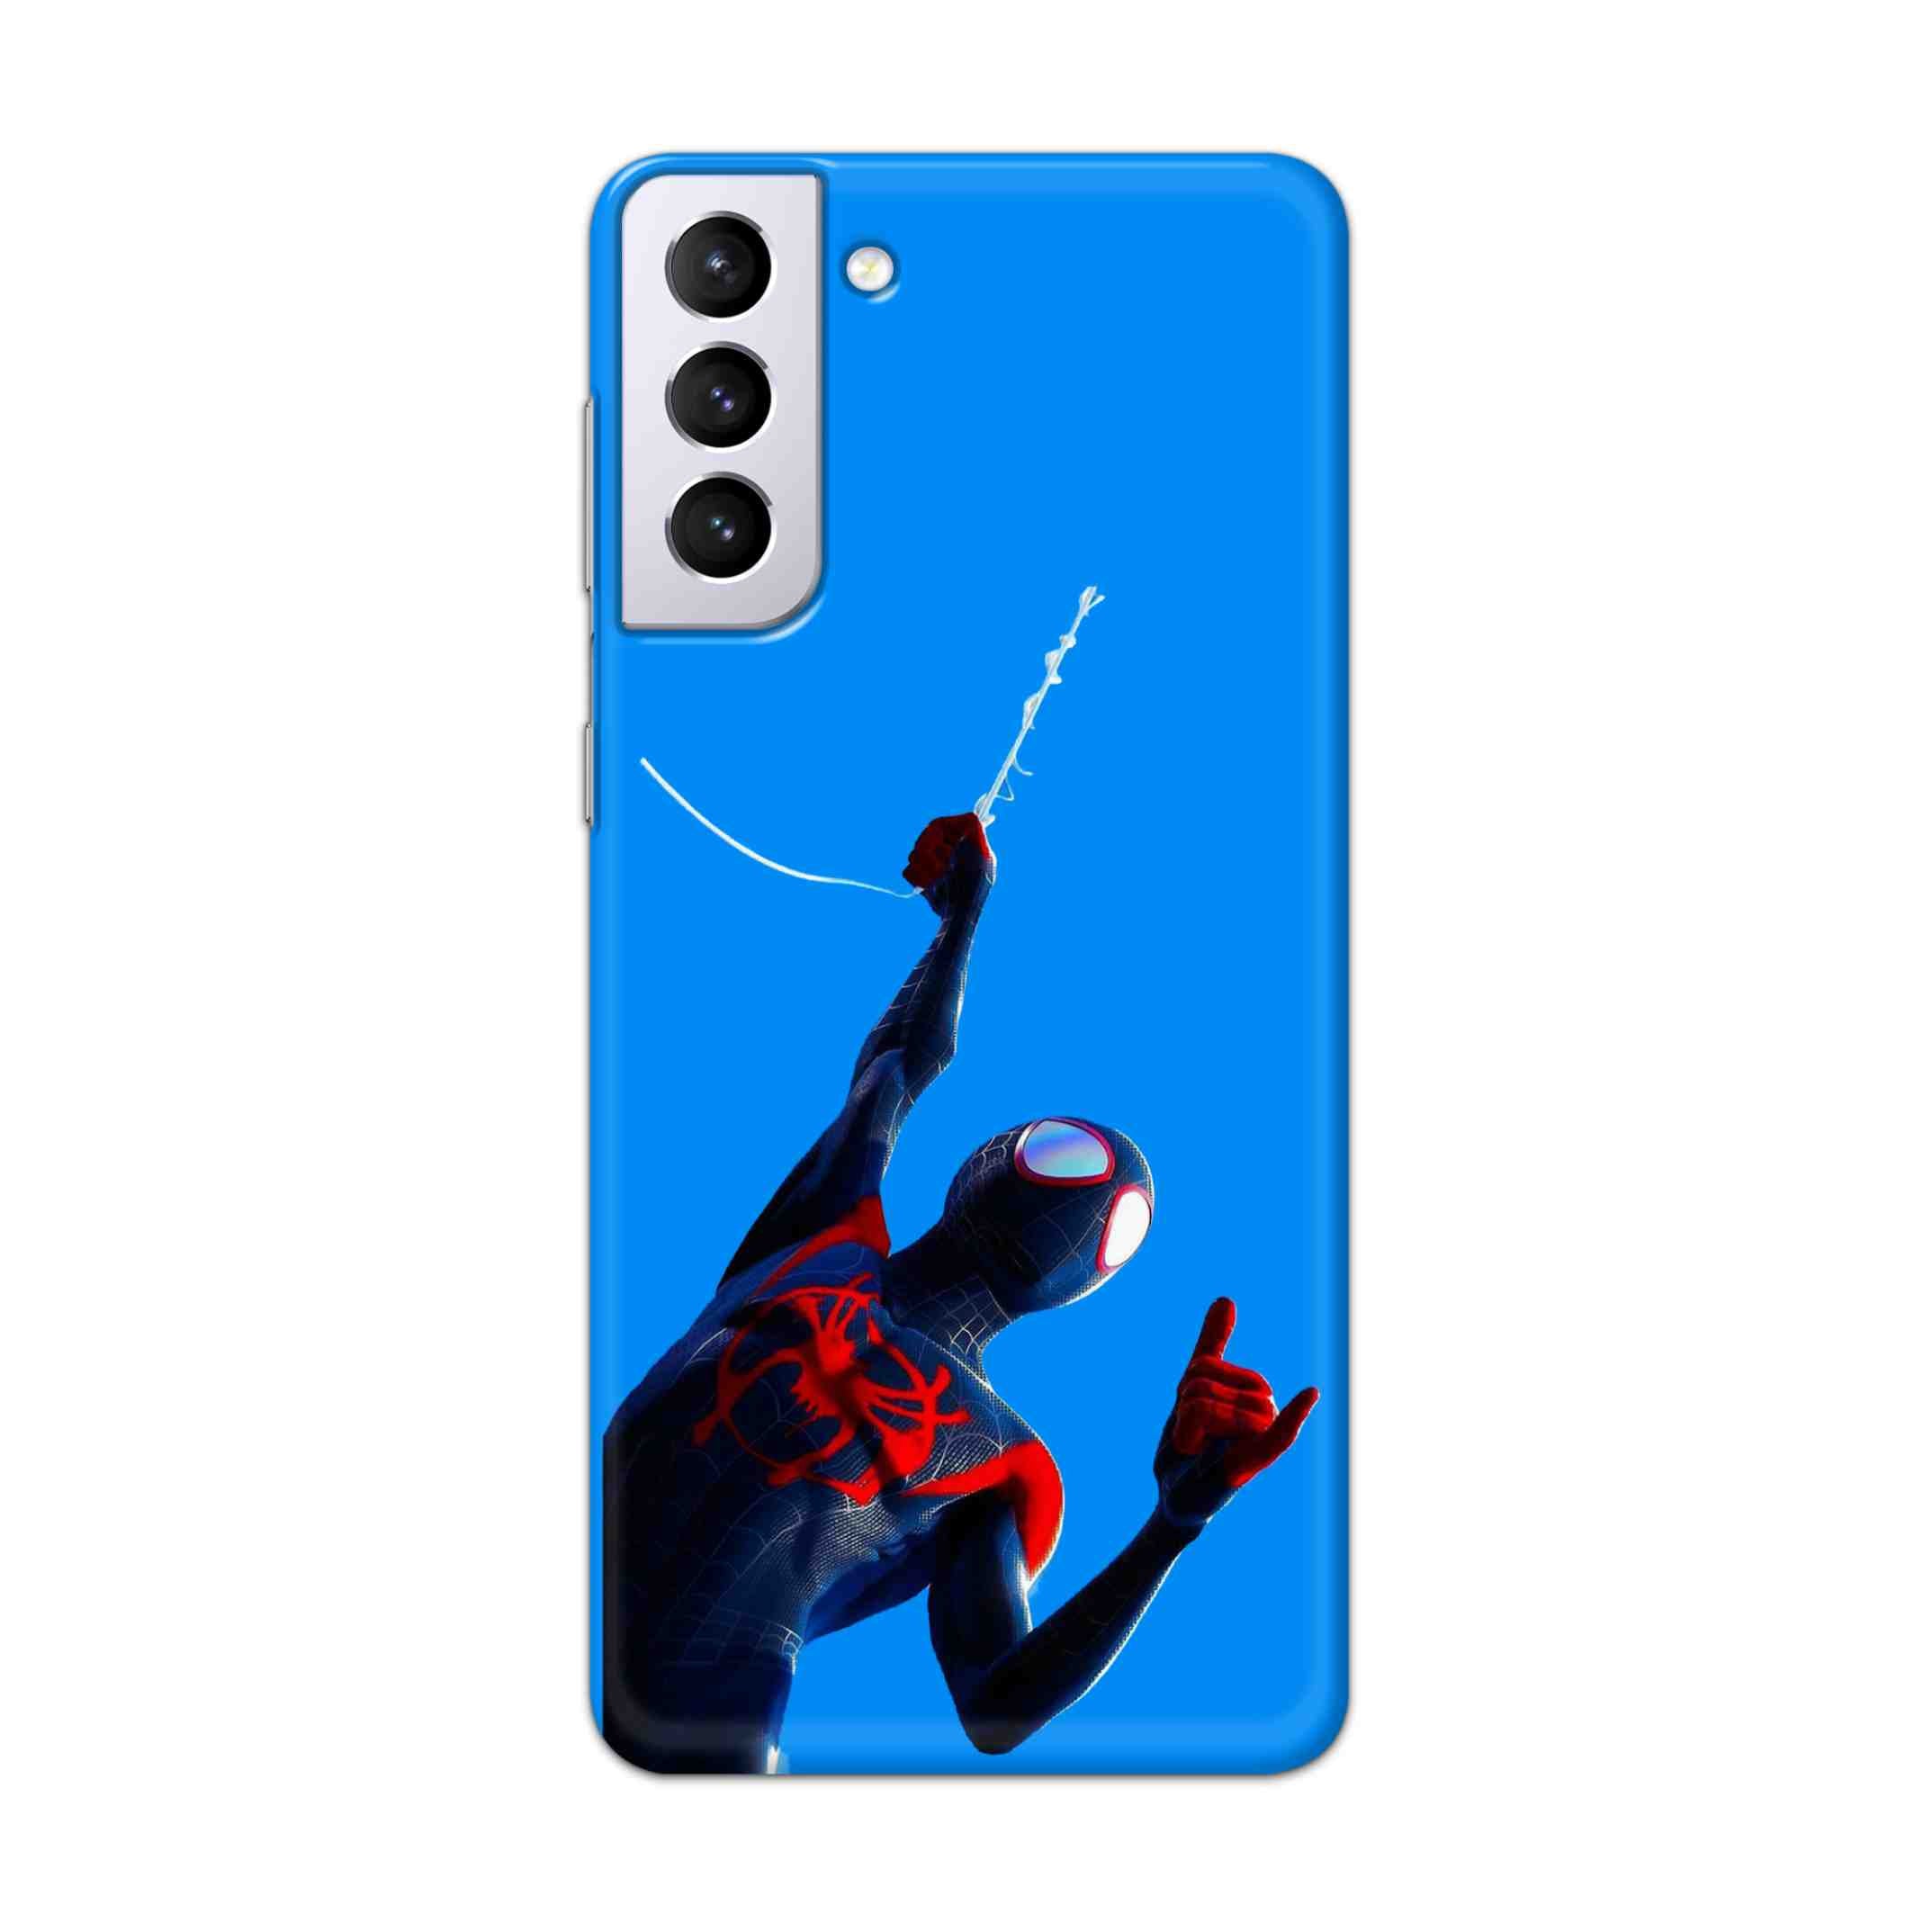 Buy Miles Morales Spiderman Hard Back Mobile Phone Case Cover For Samsung Galaxy S21 Plus Online